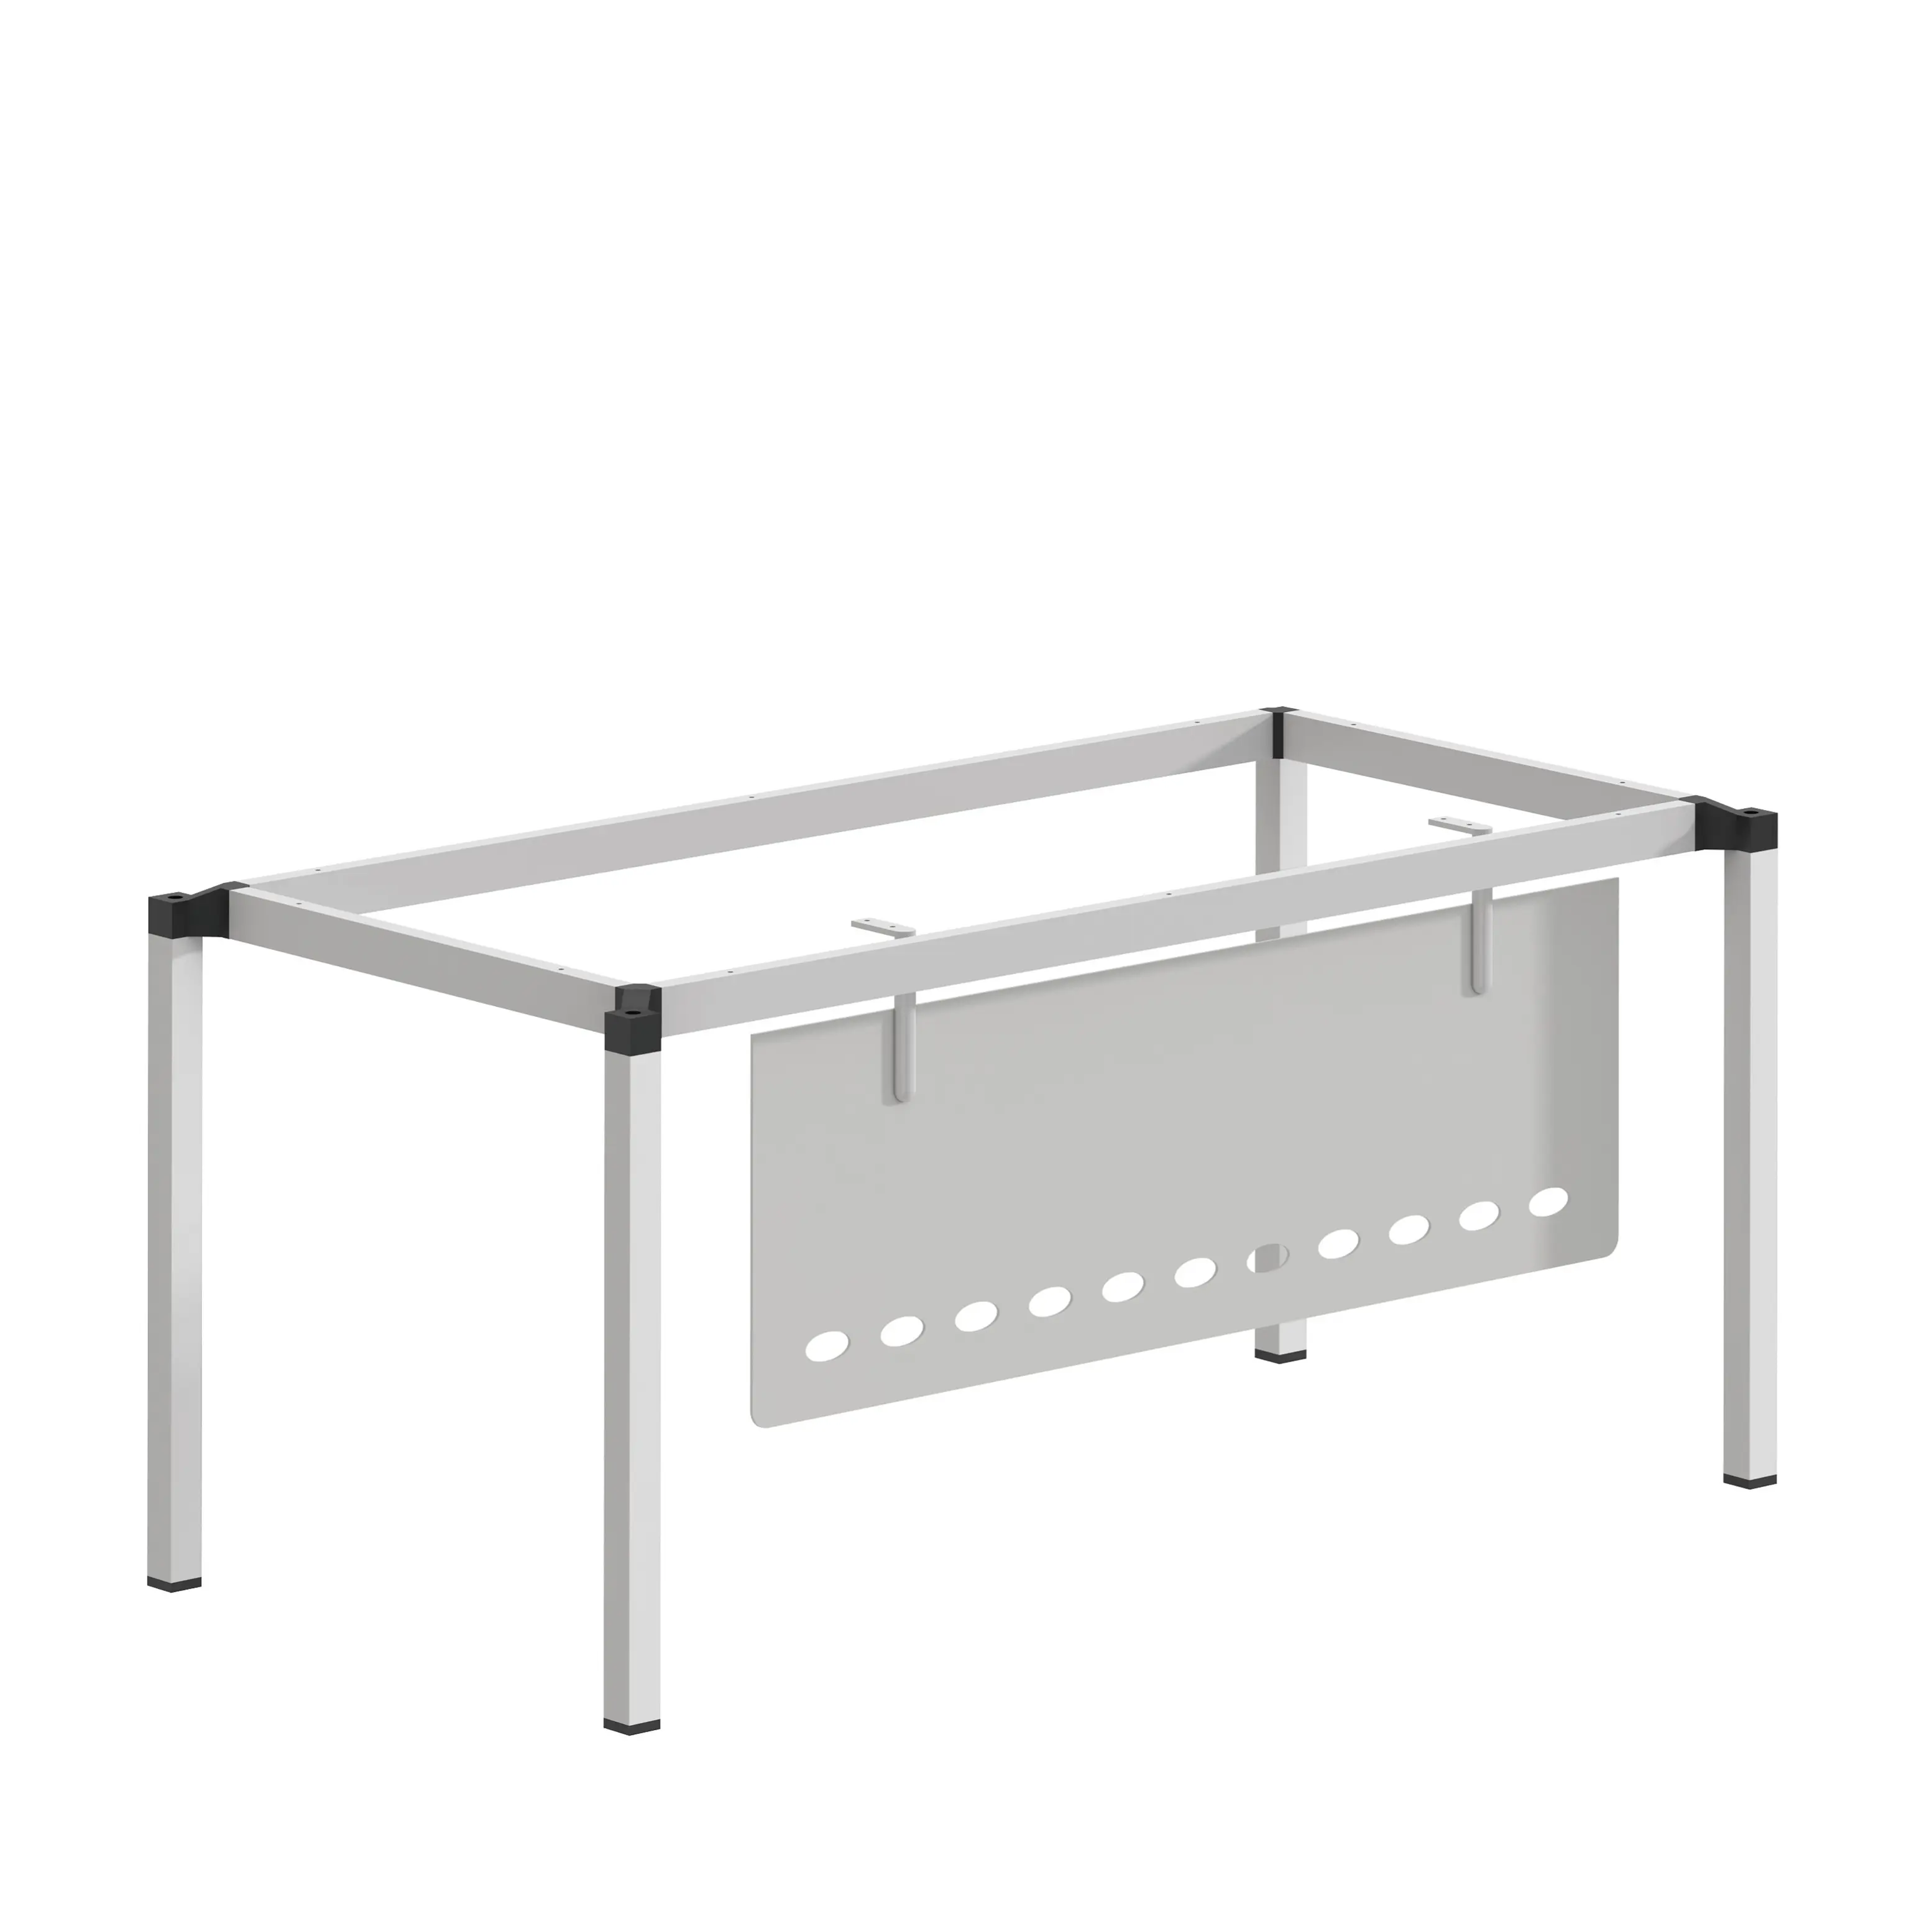 Modern style in a variety of colors available 40*40 tube desk conference table dining table with steel feet furniture legs